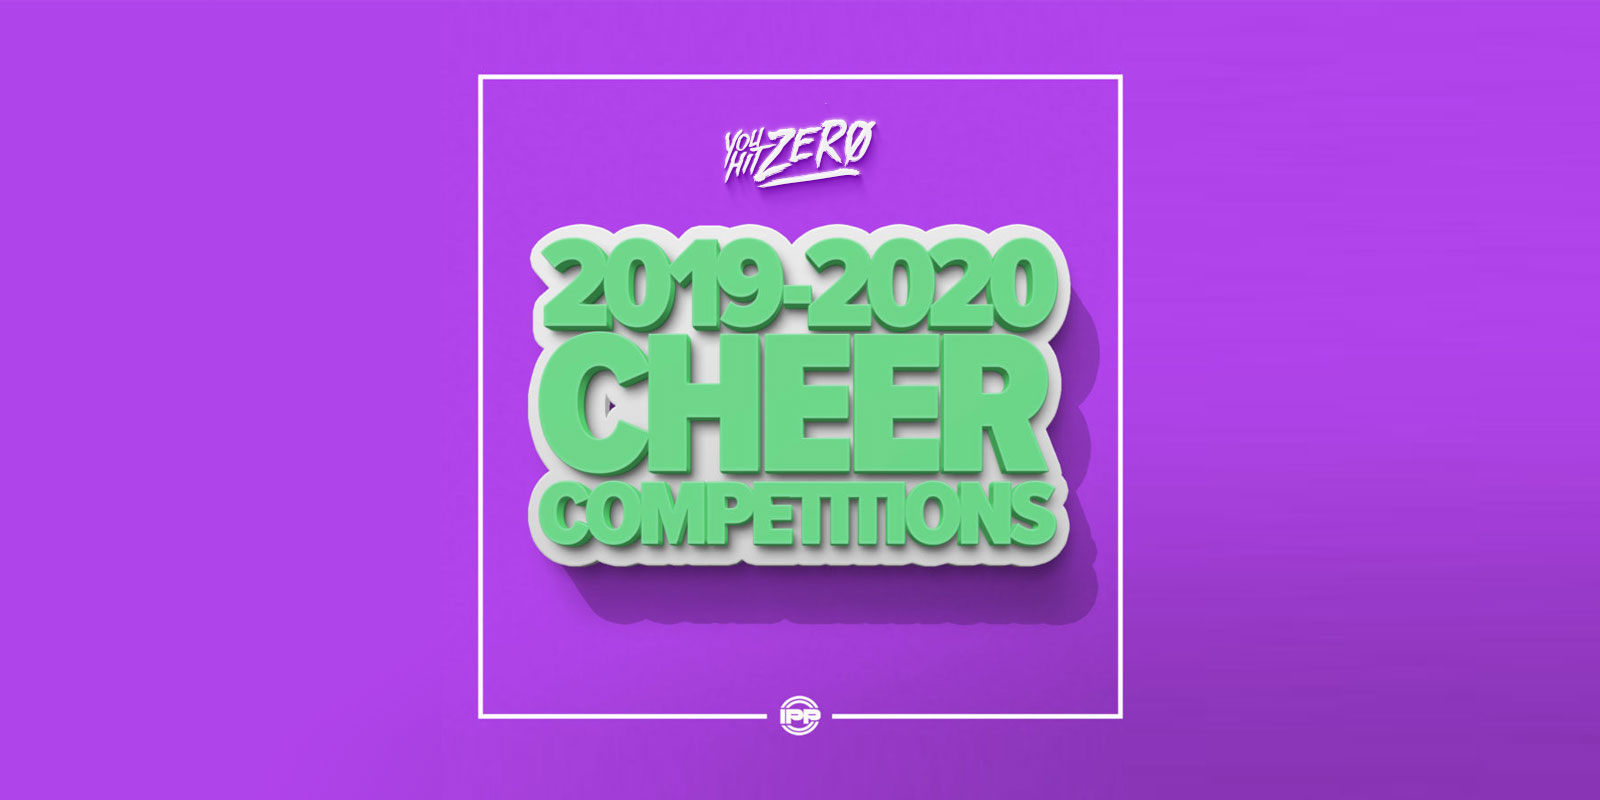 19 Cheer Competitions Usasf Sanctioned And Non Sanctioned